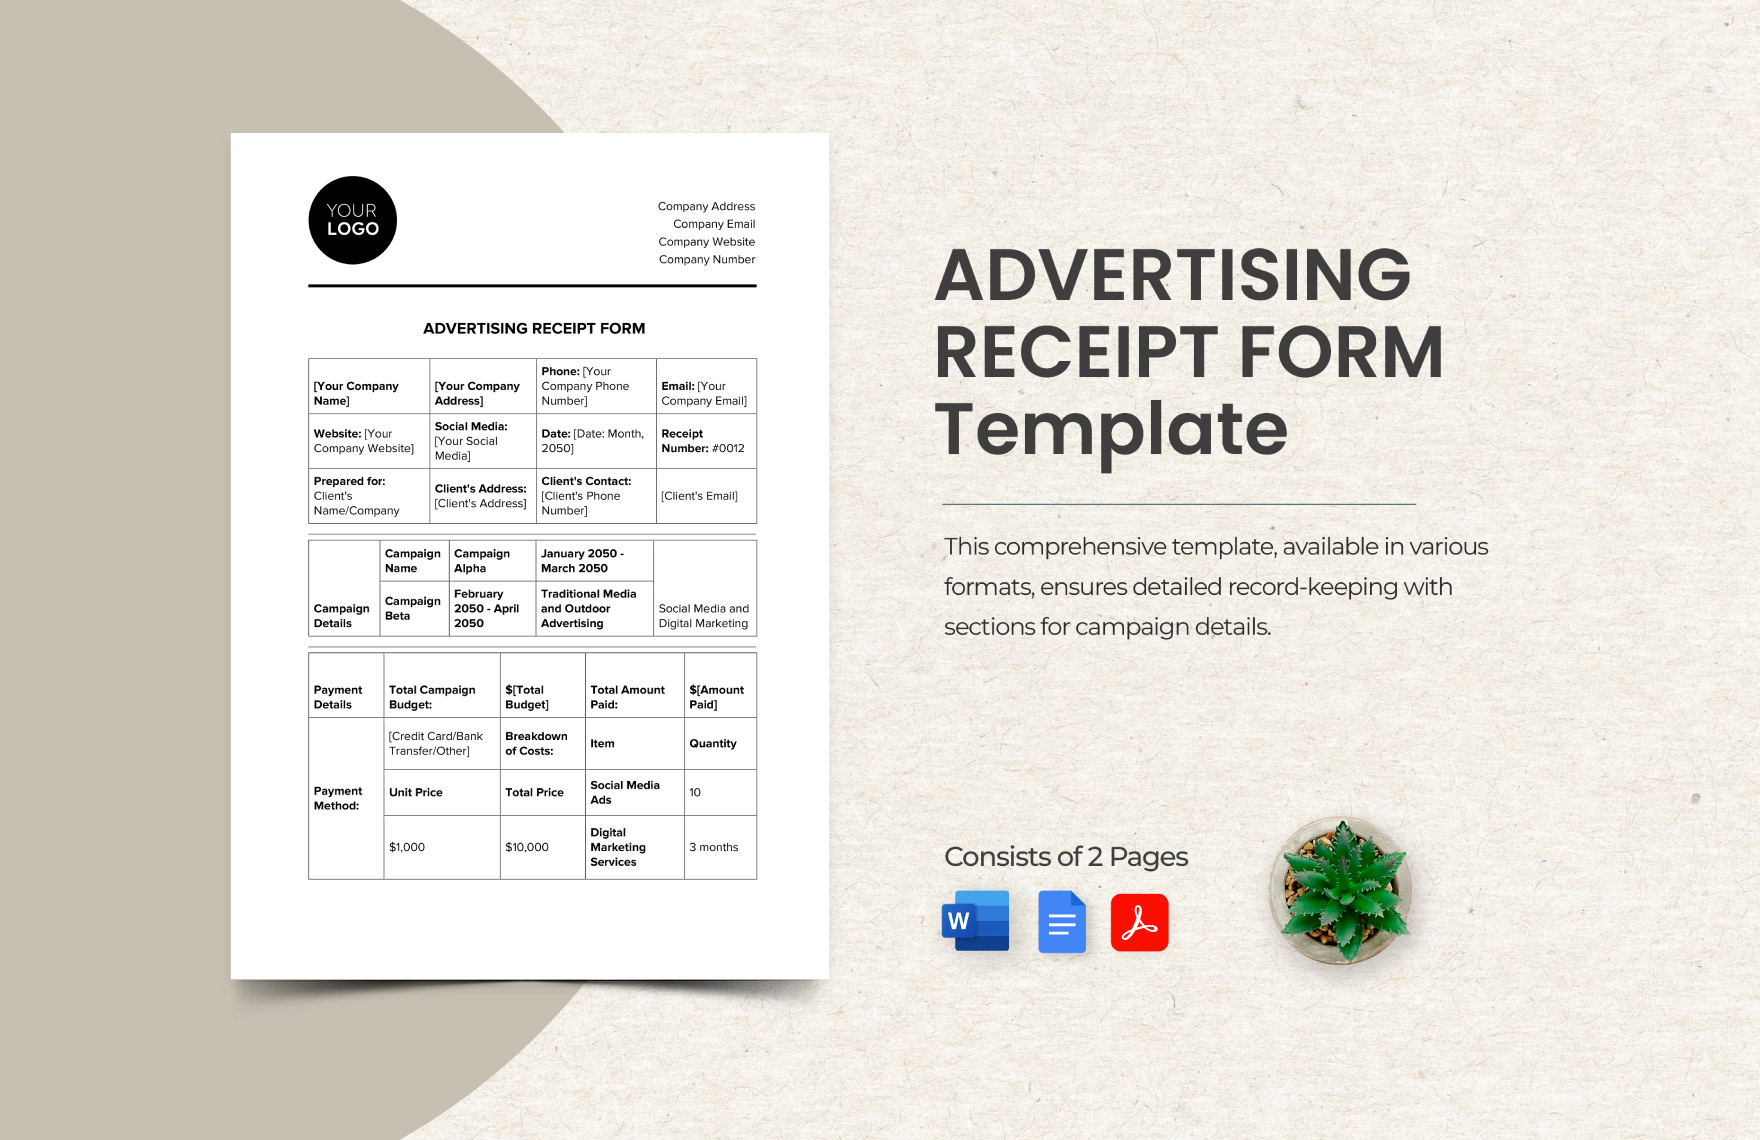 Advertising Receipt Form Template in Word, Google Docs, PDF